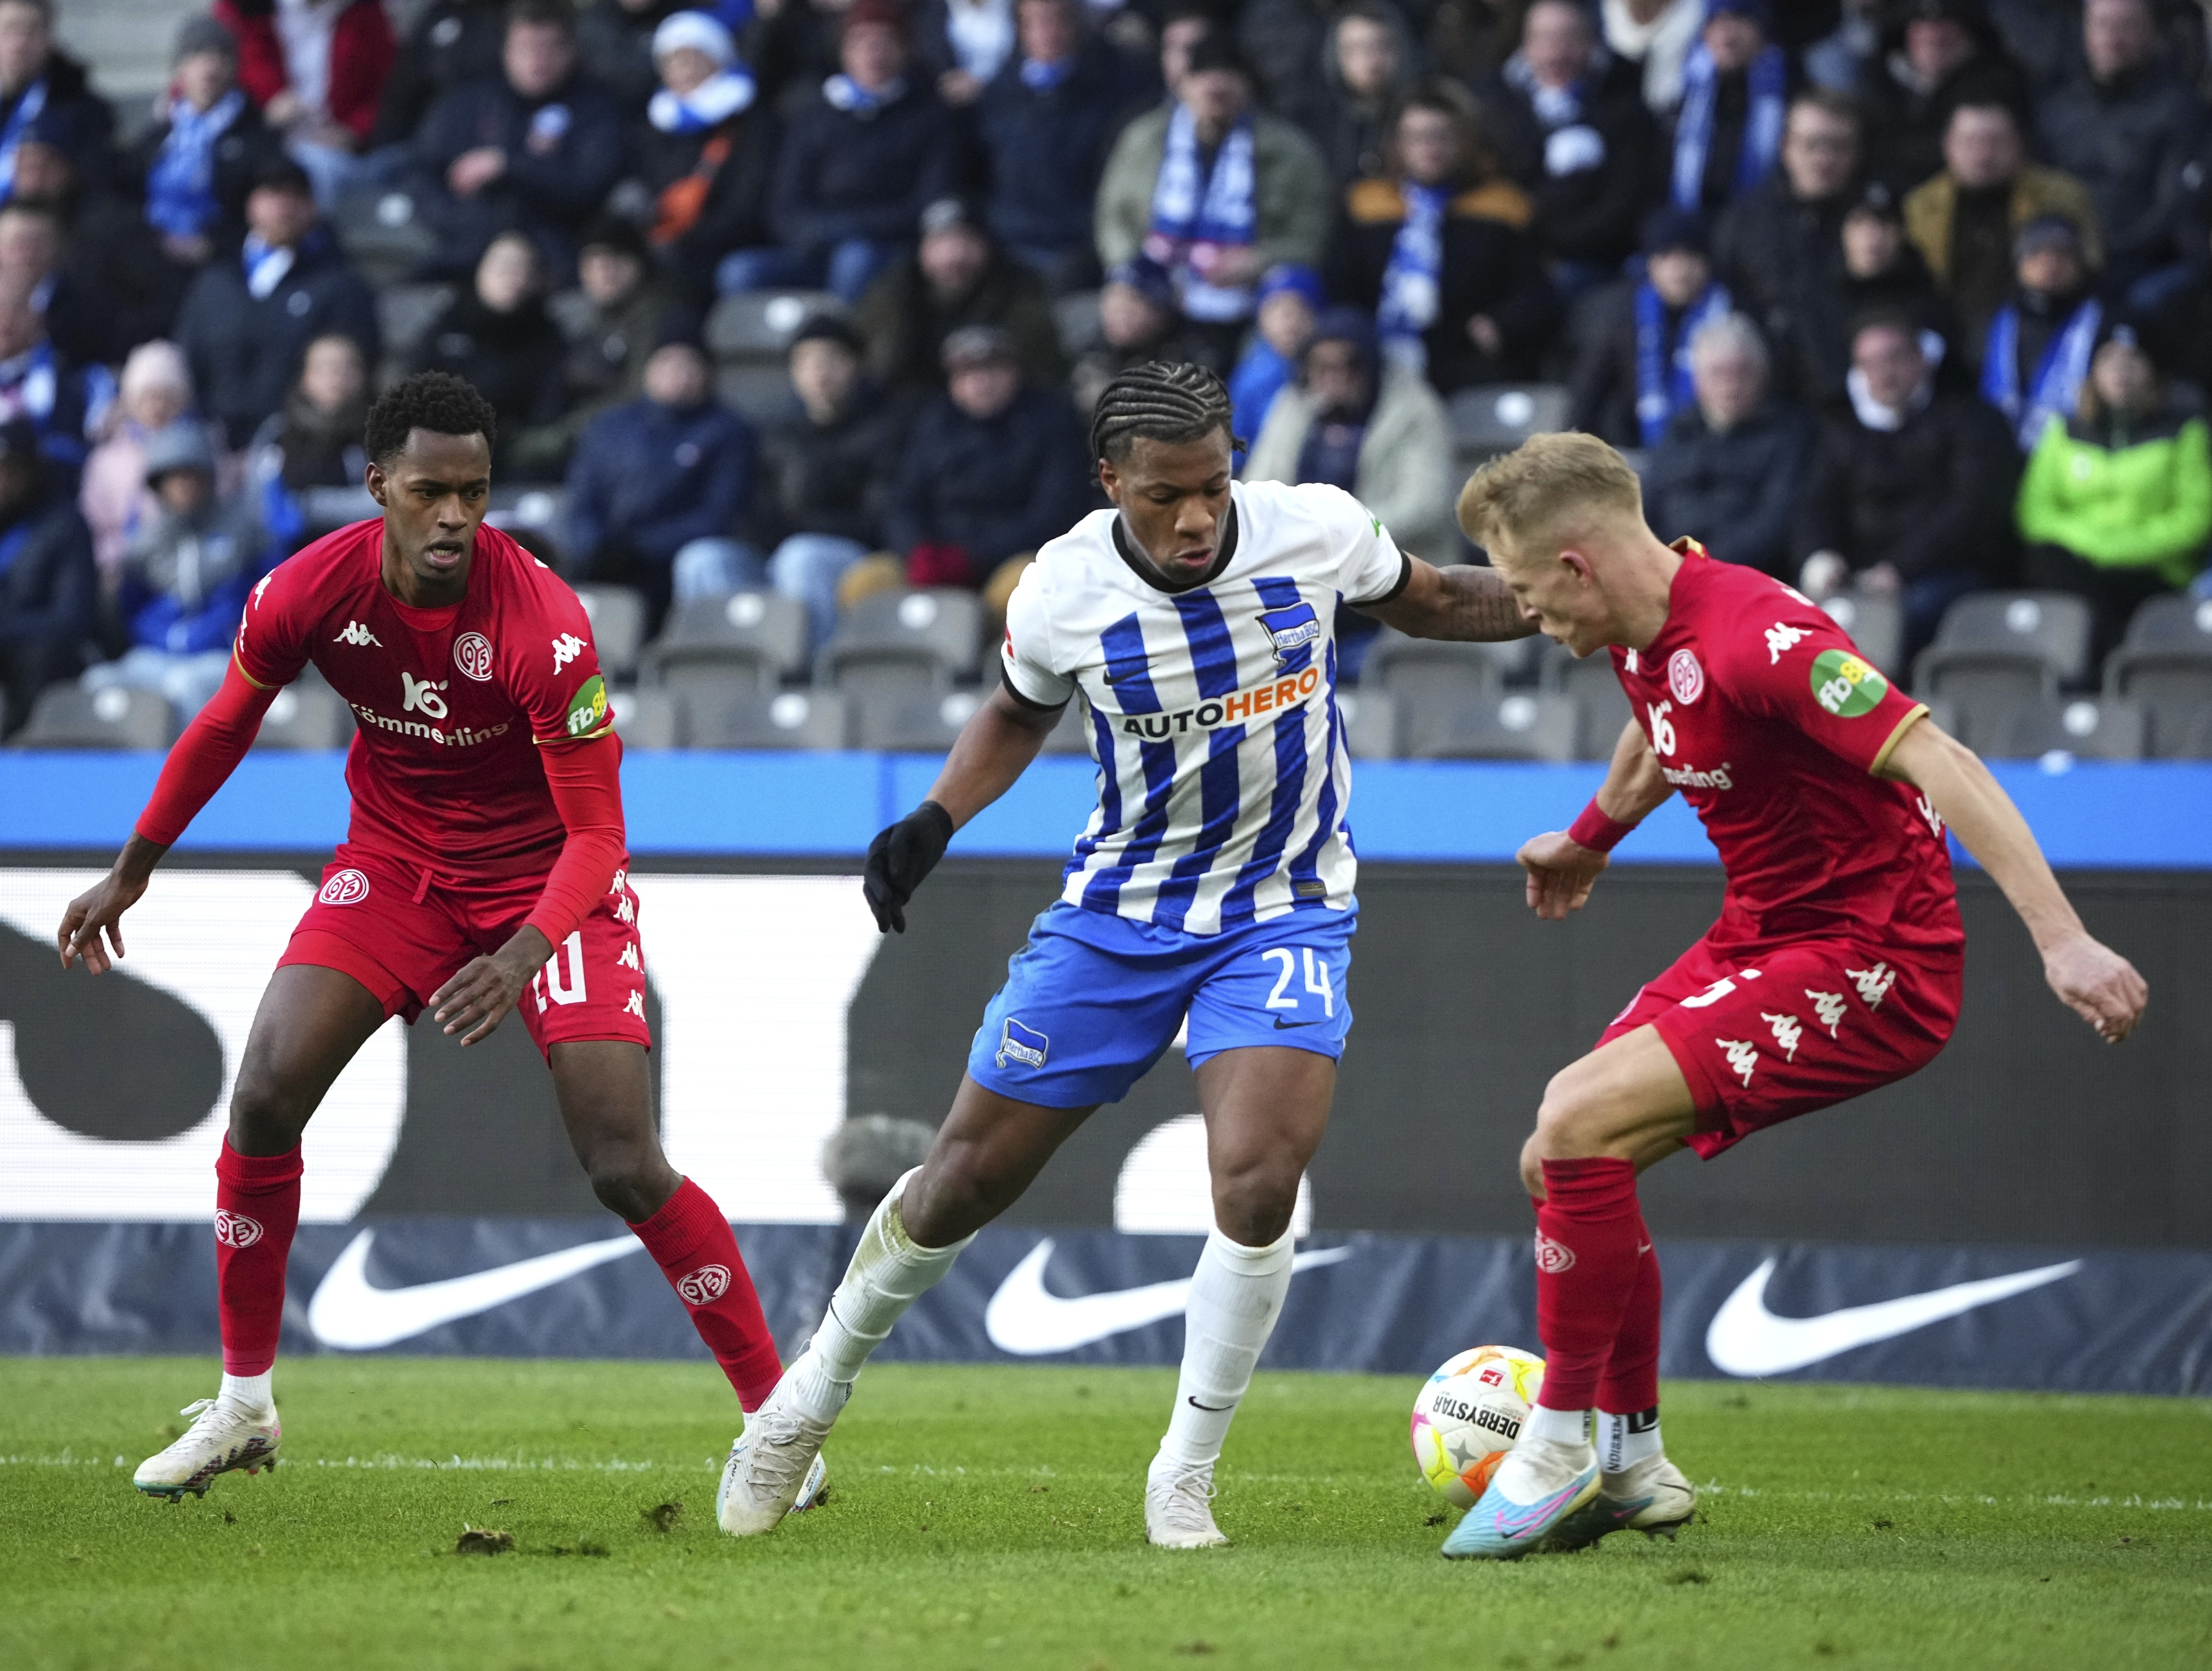 Hertha Berlin's Jessica Ngankam fights for the ball with Mainz's Edimilson Fernandes during the Bundesliga match on Saturday, March 11, 2023. (Soeren Stache/dpa via AP)